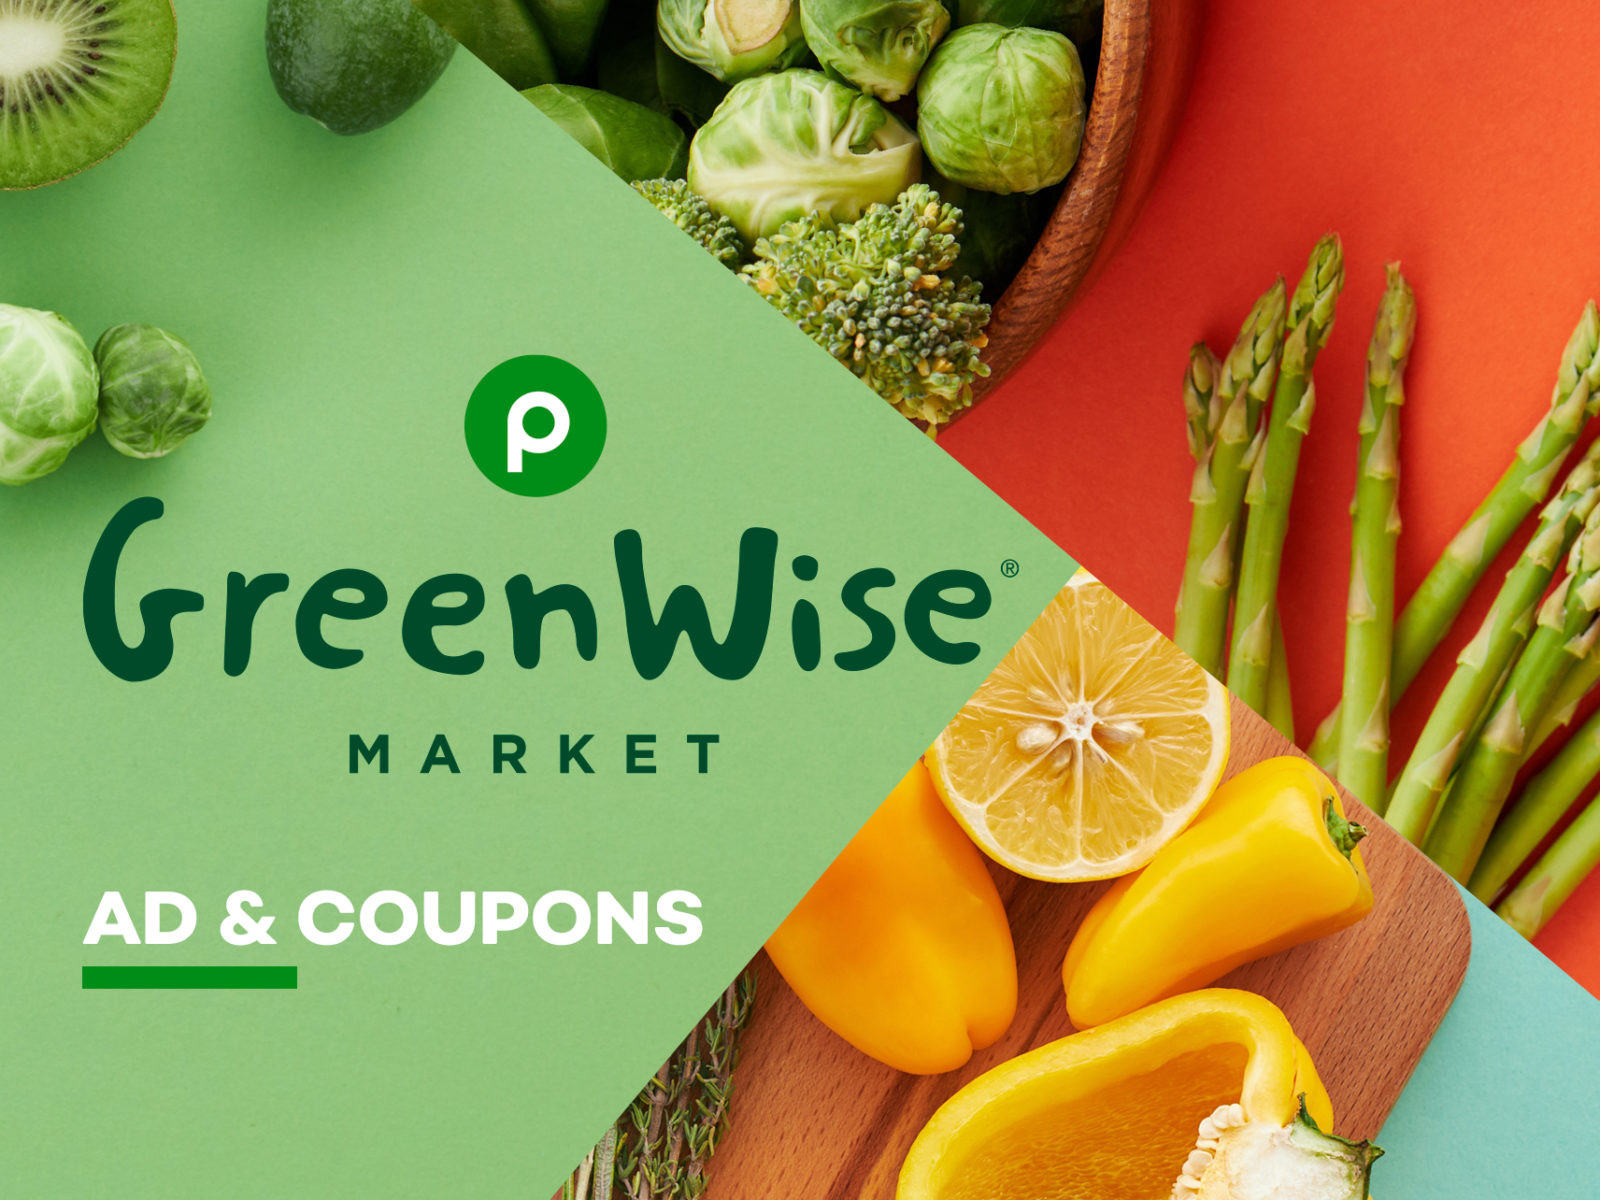 Publix GreenWise Market Ad & Coupons Week Of 2/22 to 2/28 (2/21 to 2/27 For Some)